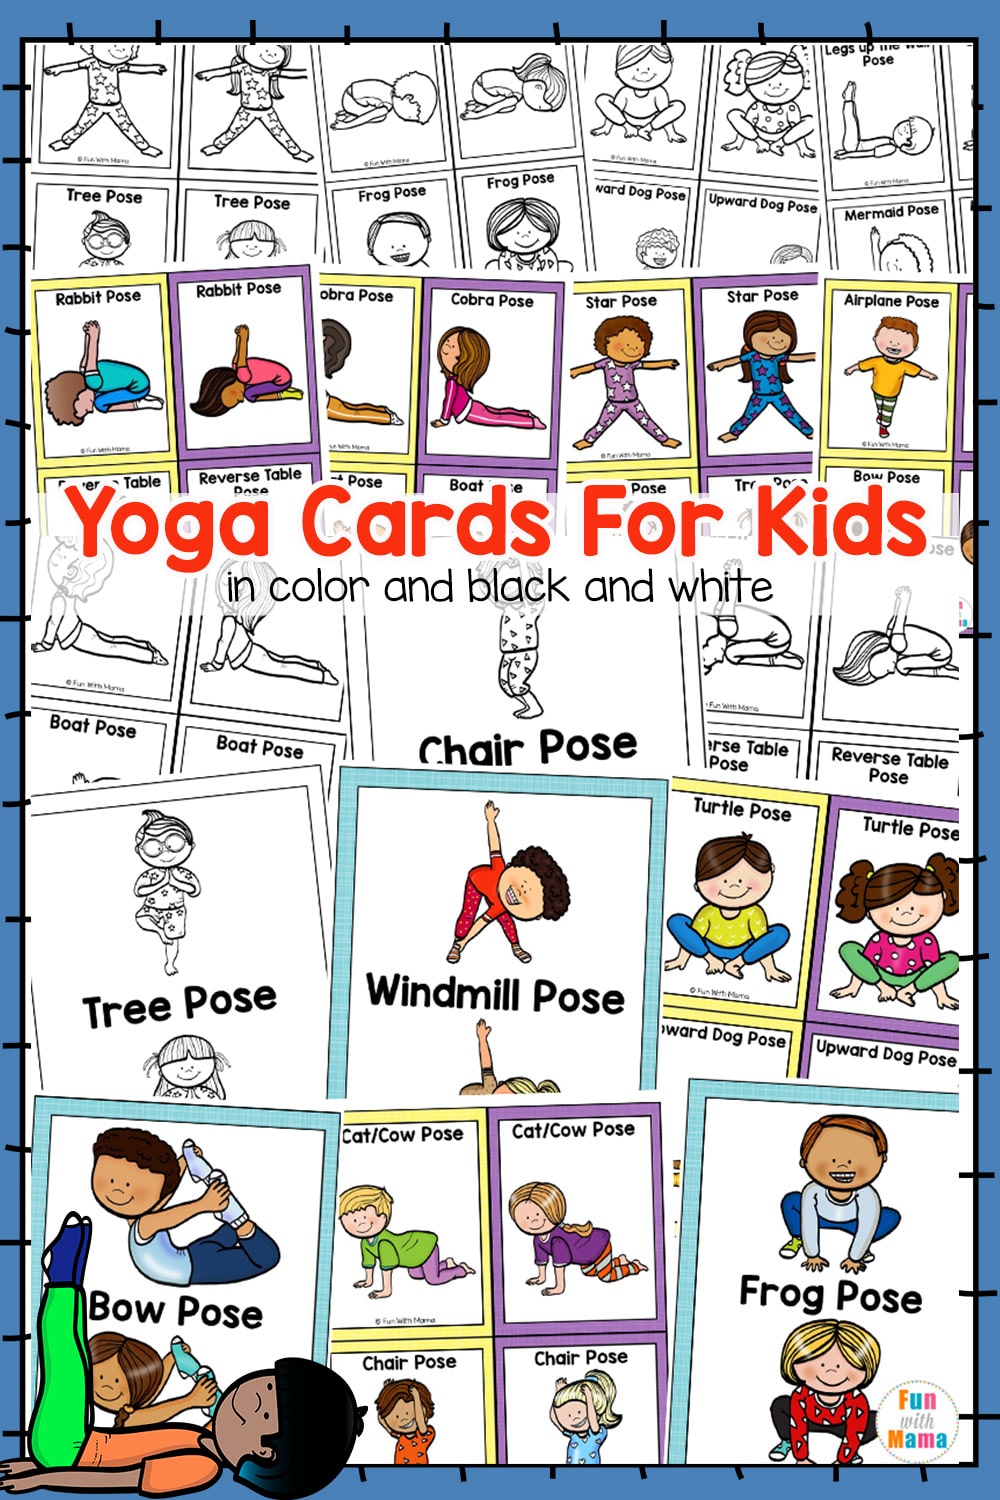 Yoga Cards For Kids In Color BW Fun With Mama Shop